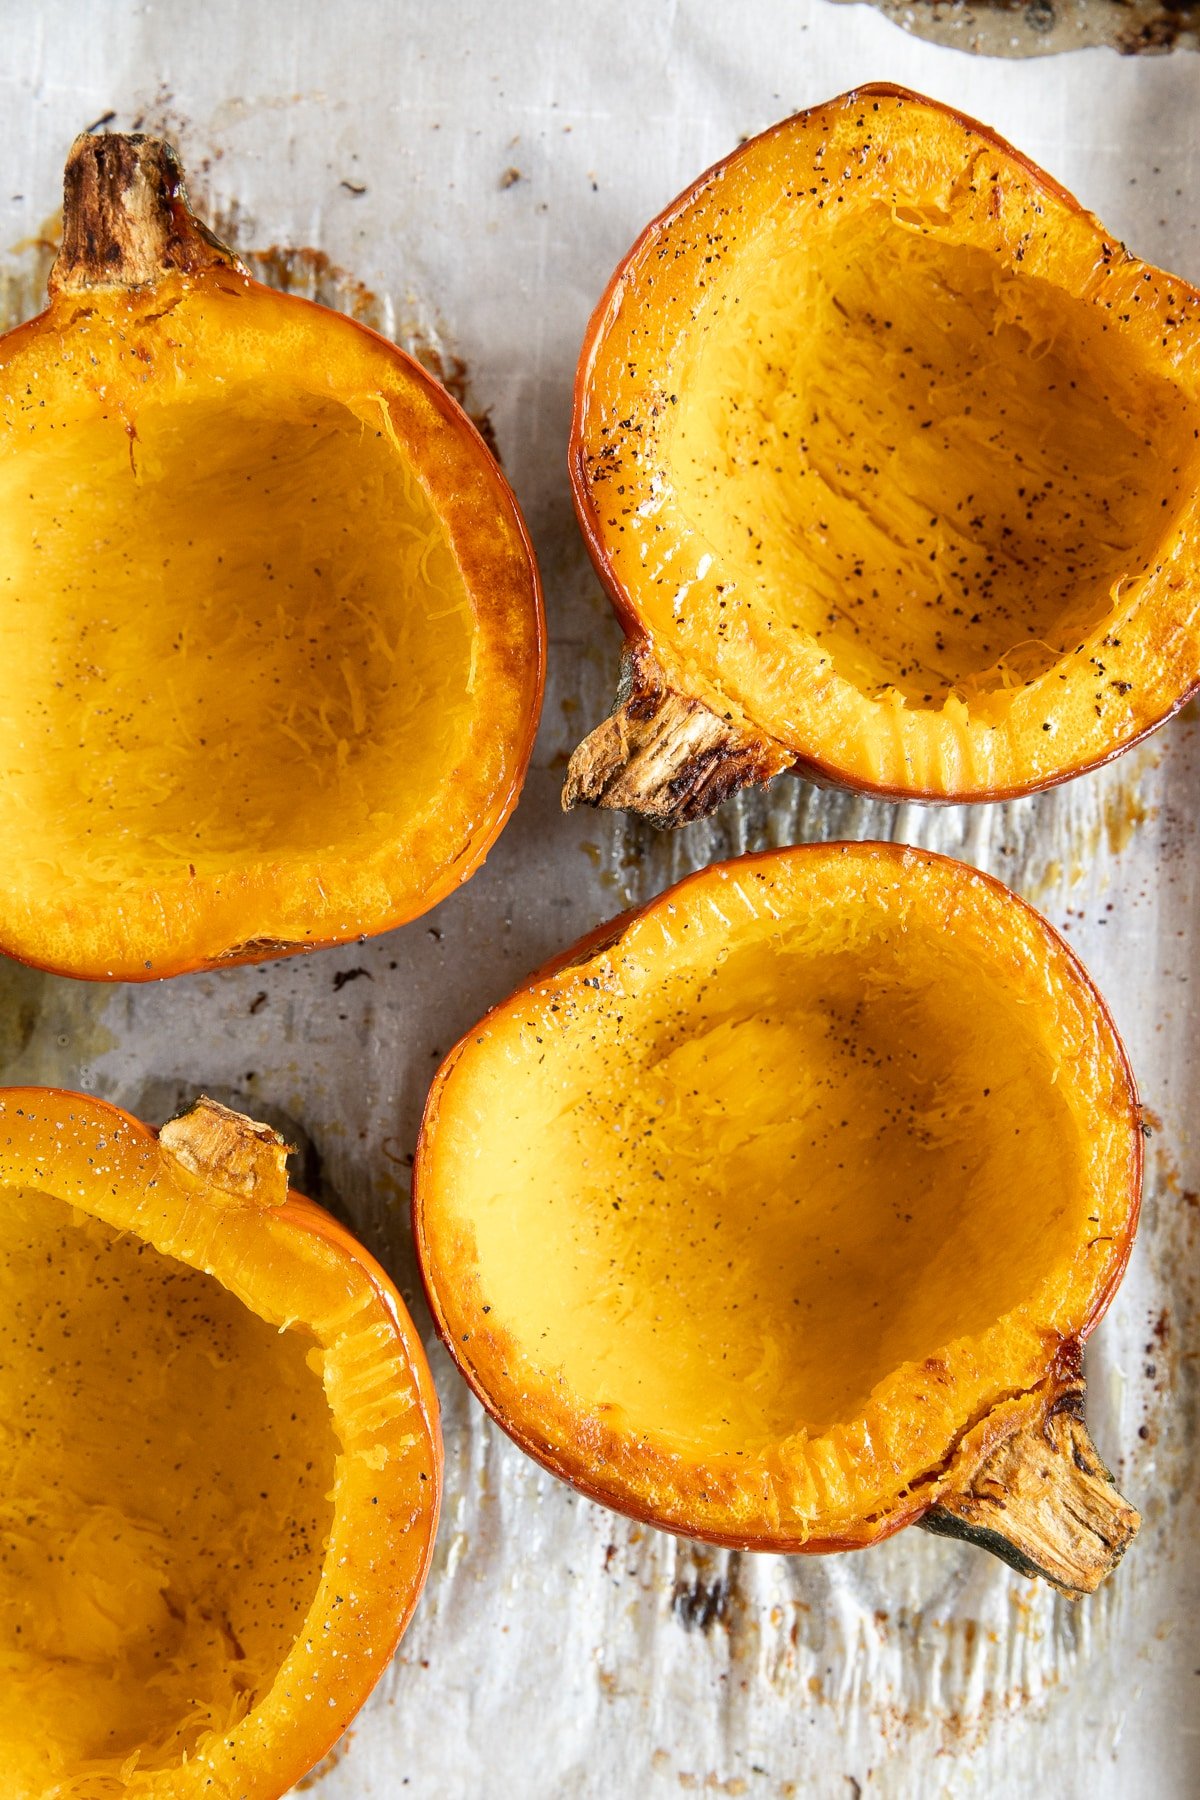 How to Cook Pumpkin: A Step-by-Step Guide